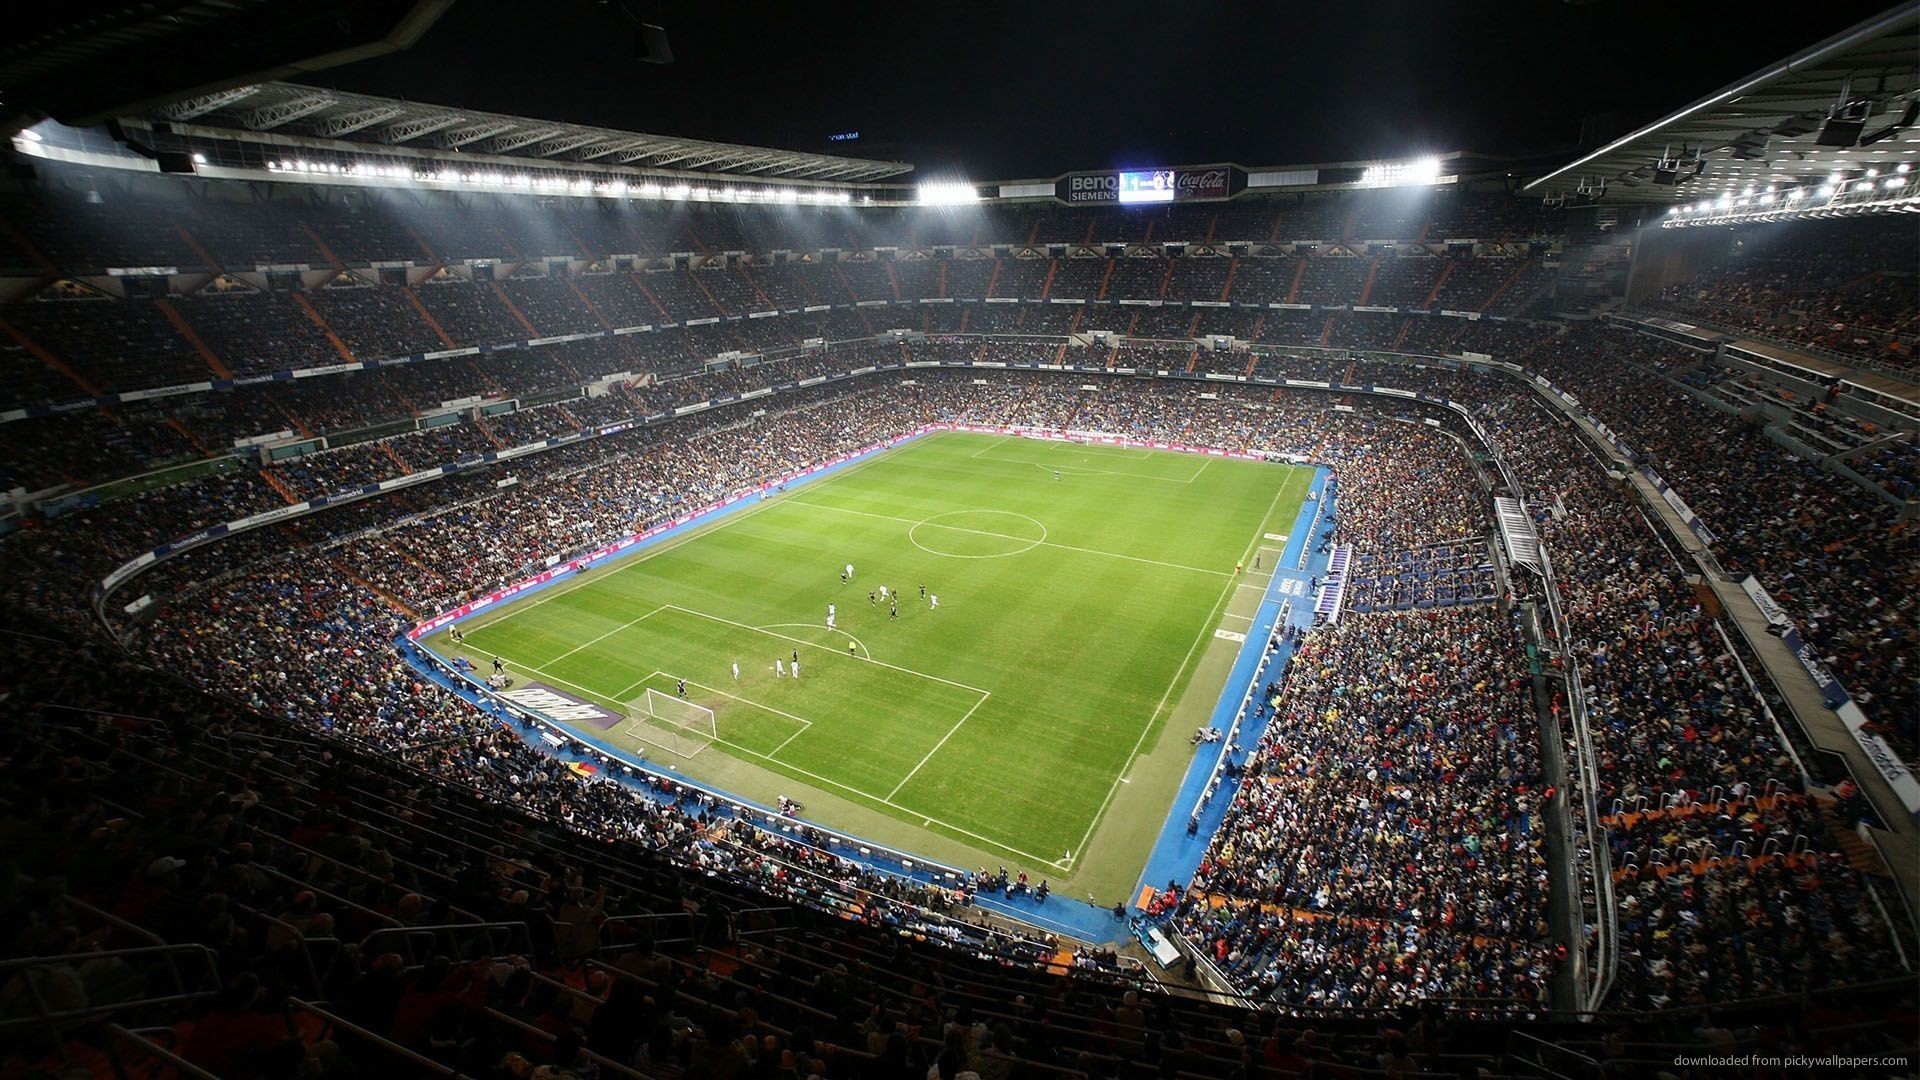 1920x1080 Real Madrid and FC Barcelona provide incredible VIP seats for watching  their matches in the Santiago